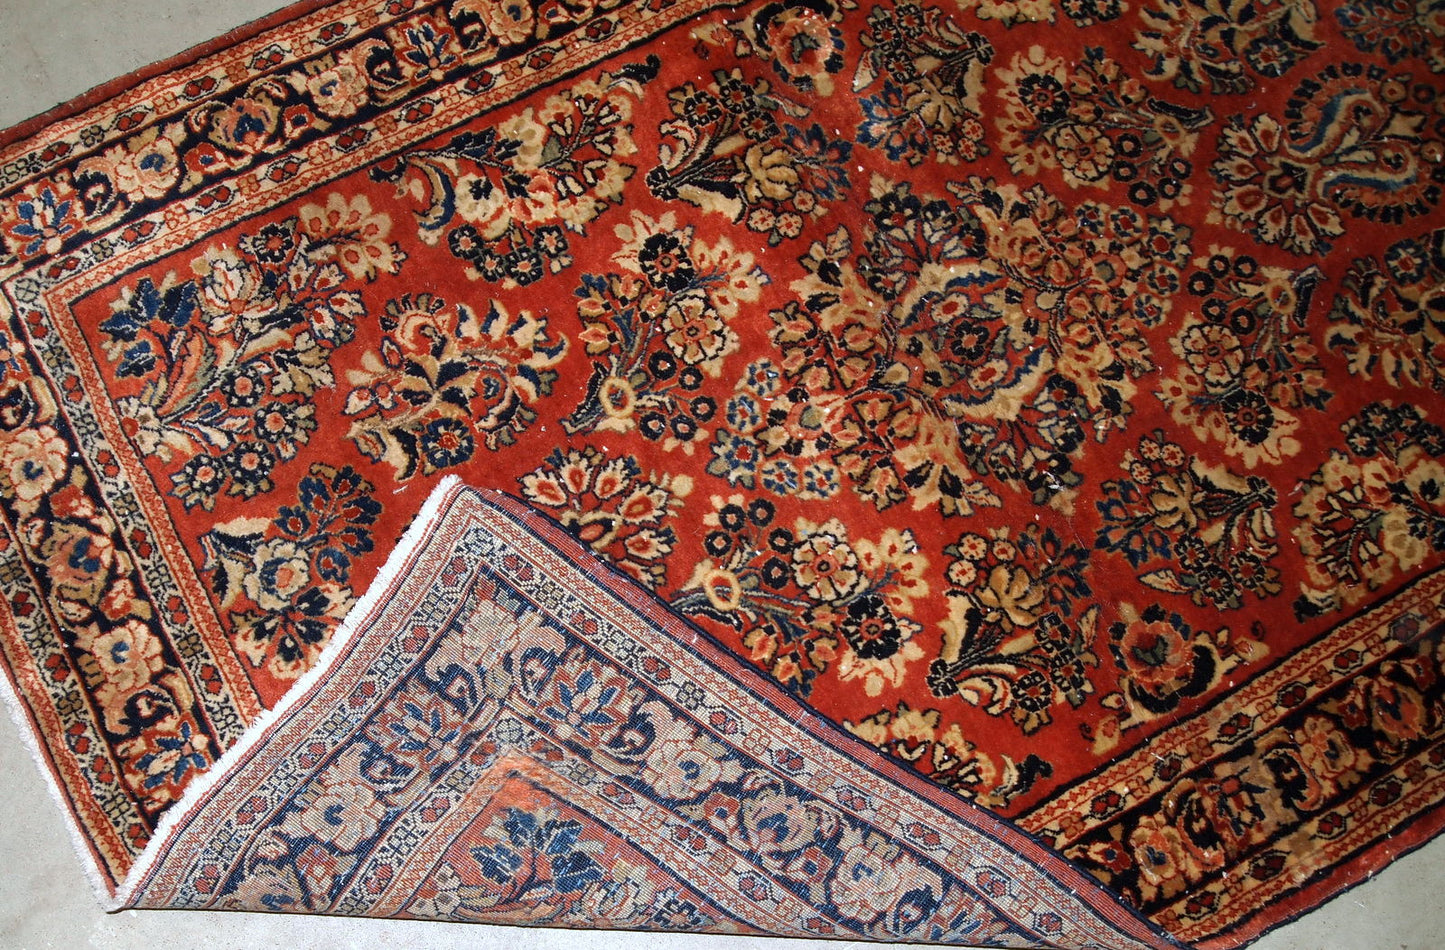 Handmade antique Persian Sarouk rug in original good condition. The rug is from the beginning of 20th century made in traditional floral design.